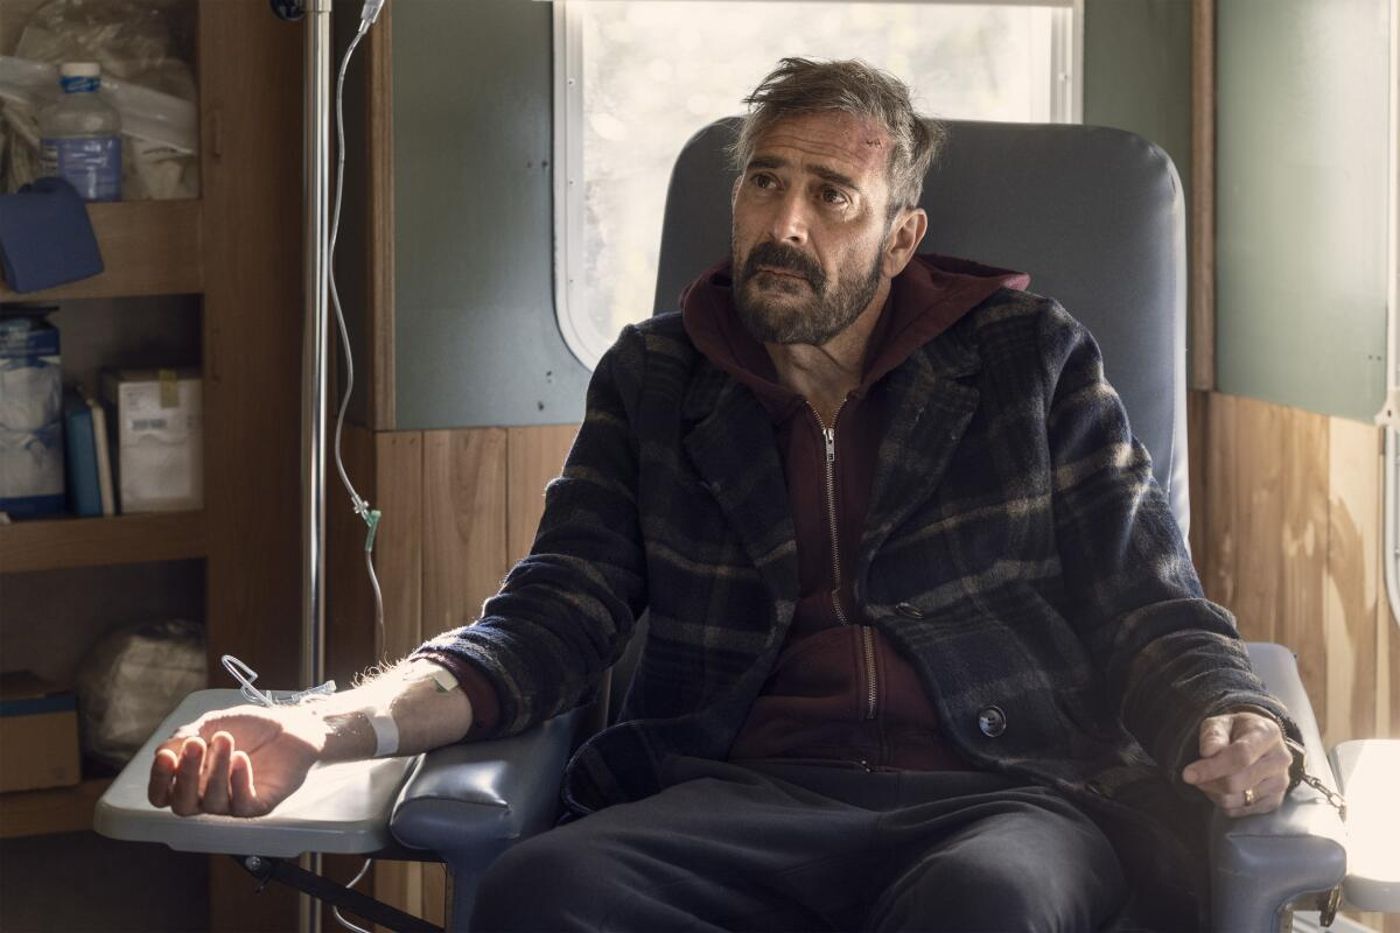 Negan receives medical treatment in the AMC television adaptation of Walking Dead